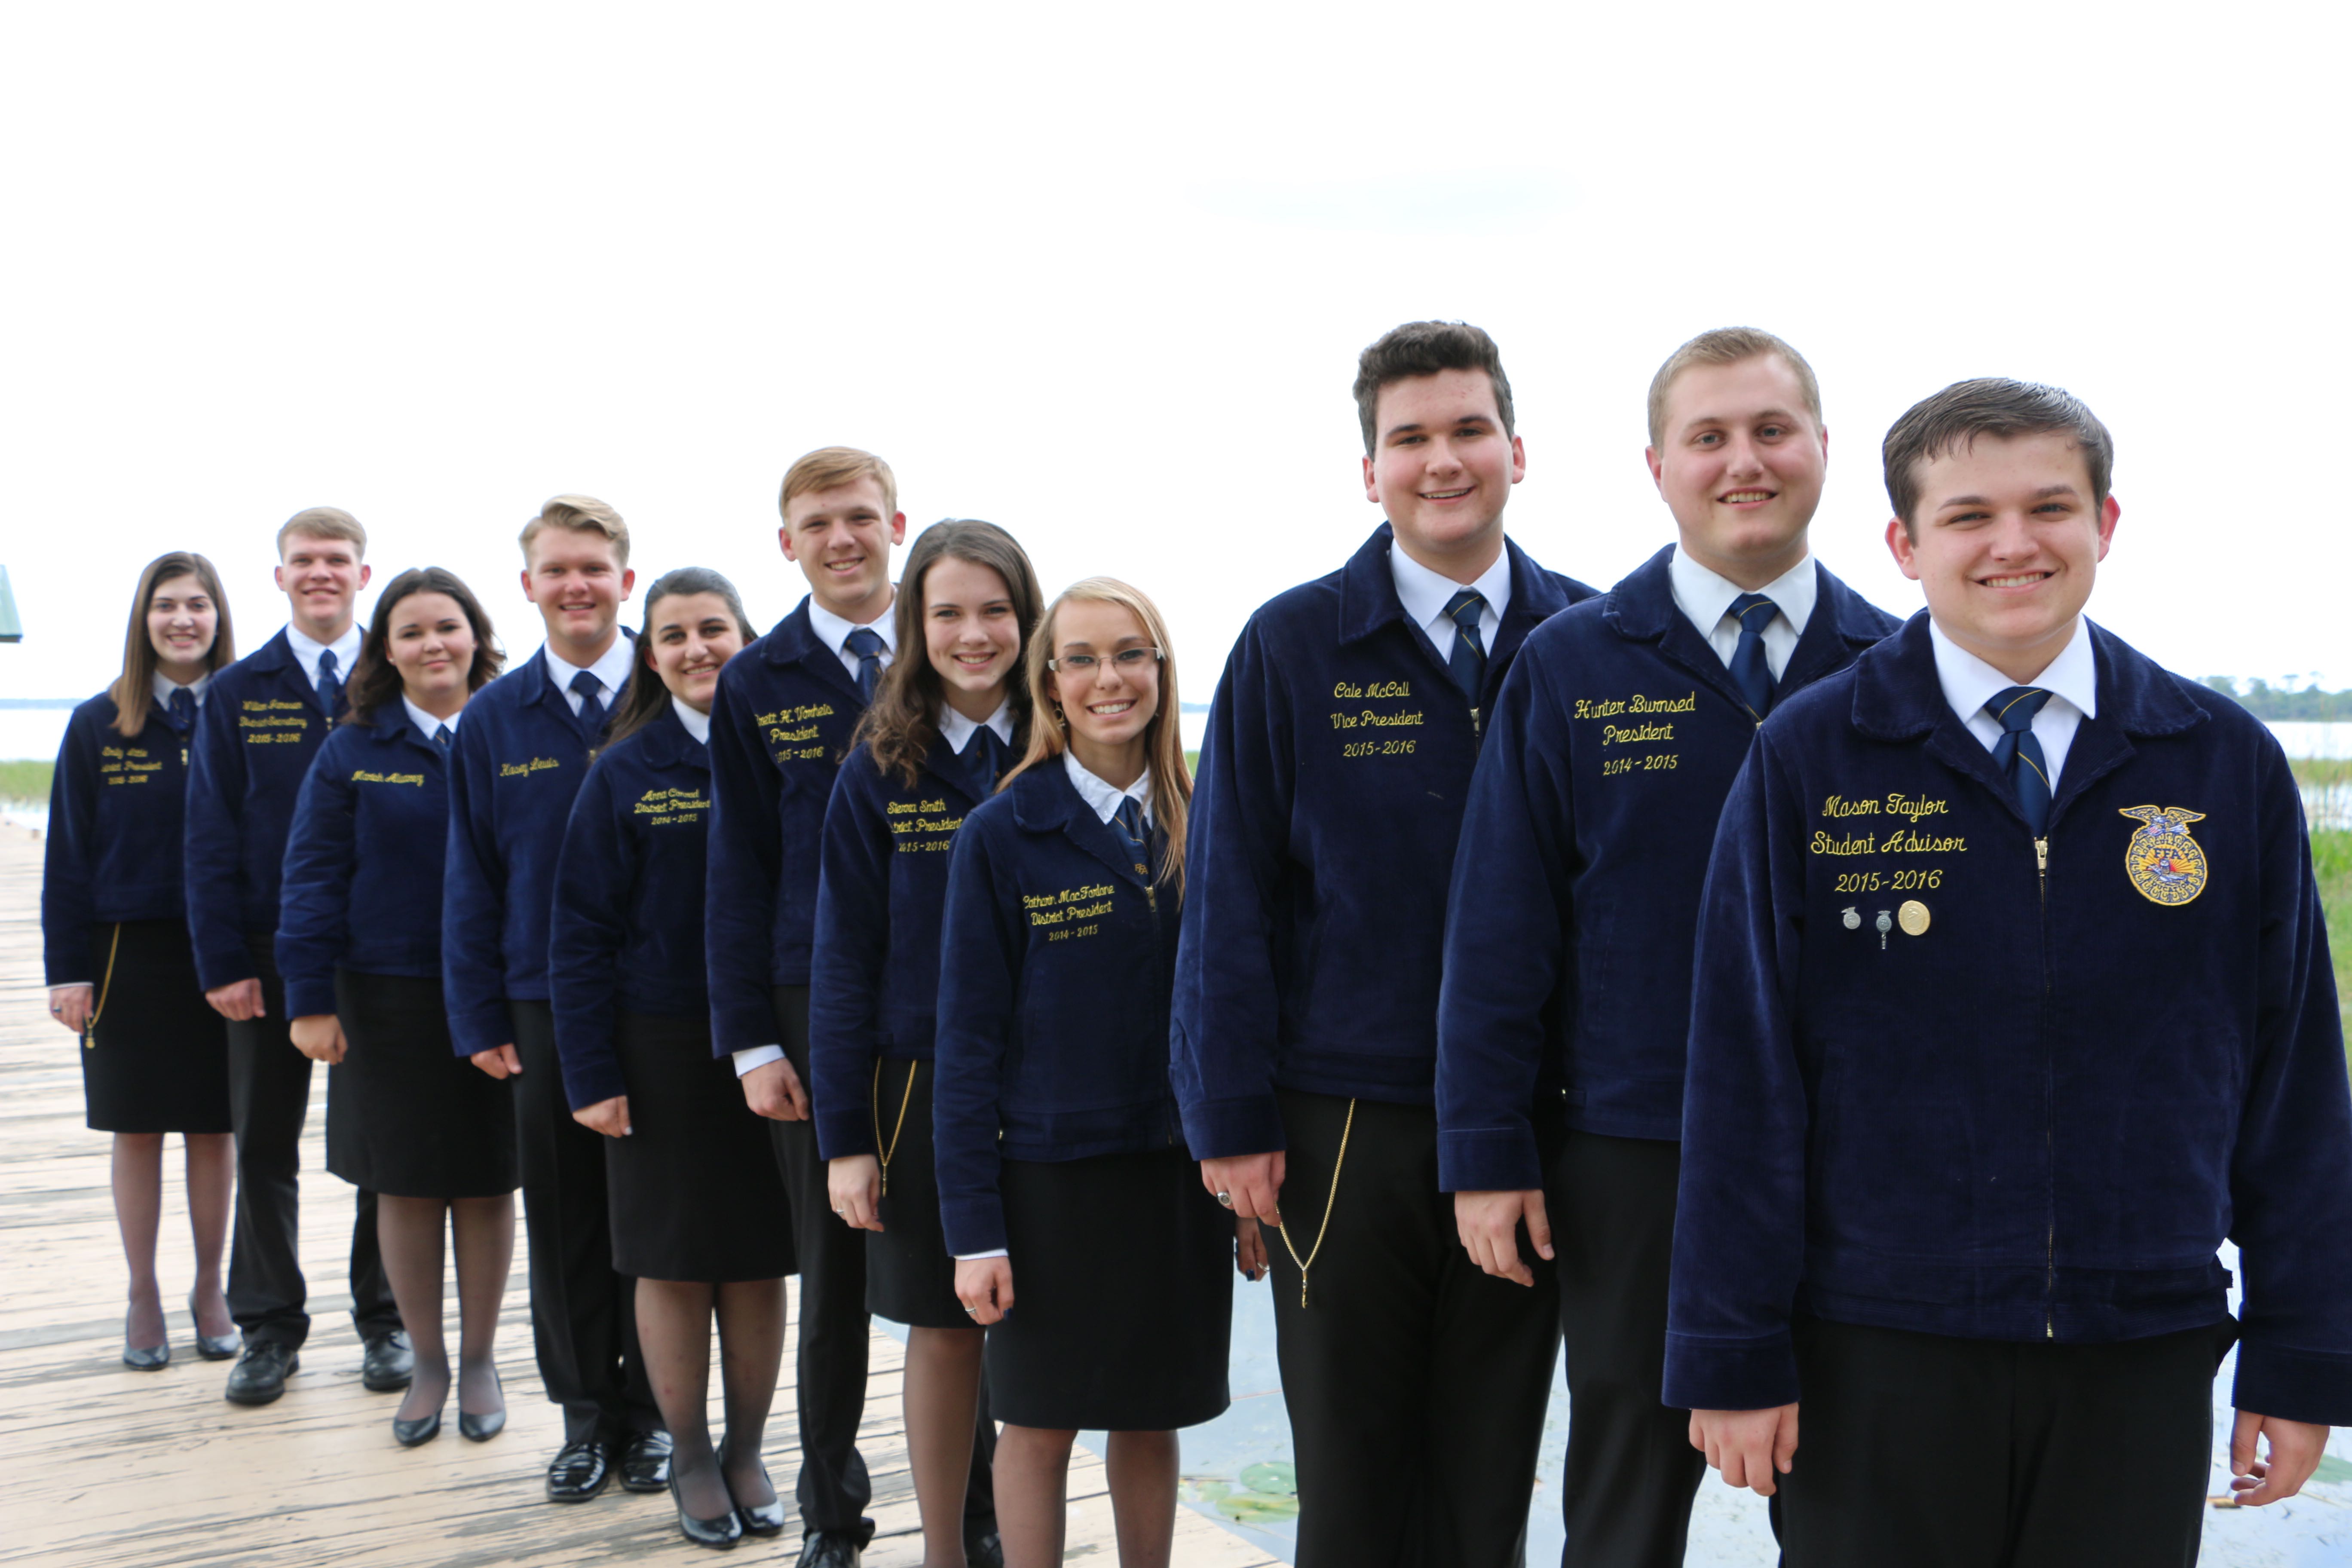 11 FFA Members Slated for 2016-17 State FFA Officer Team